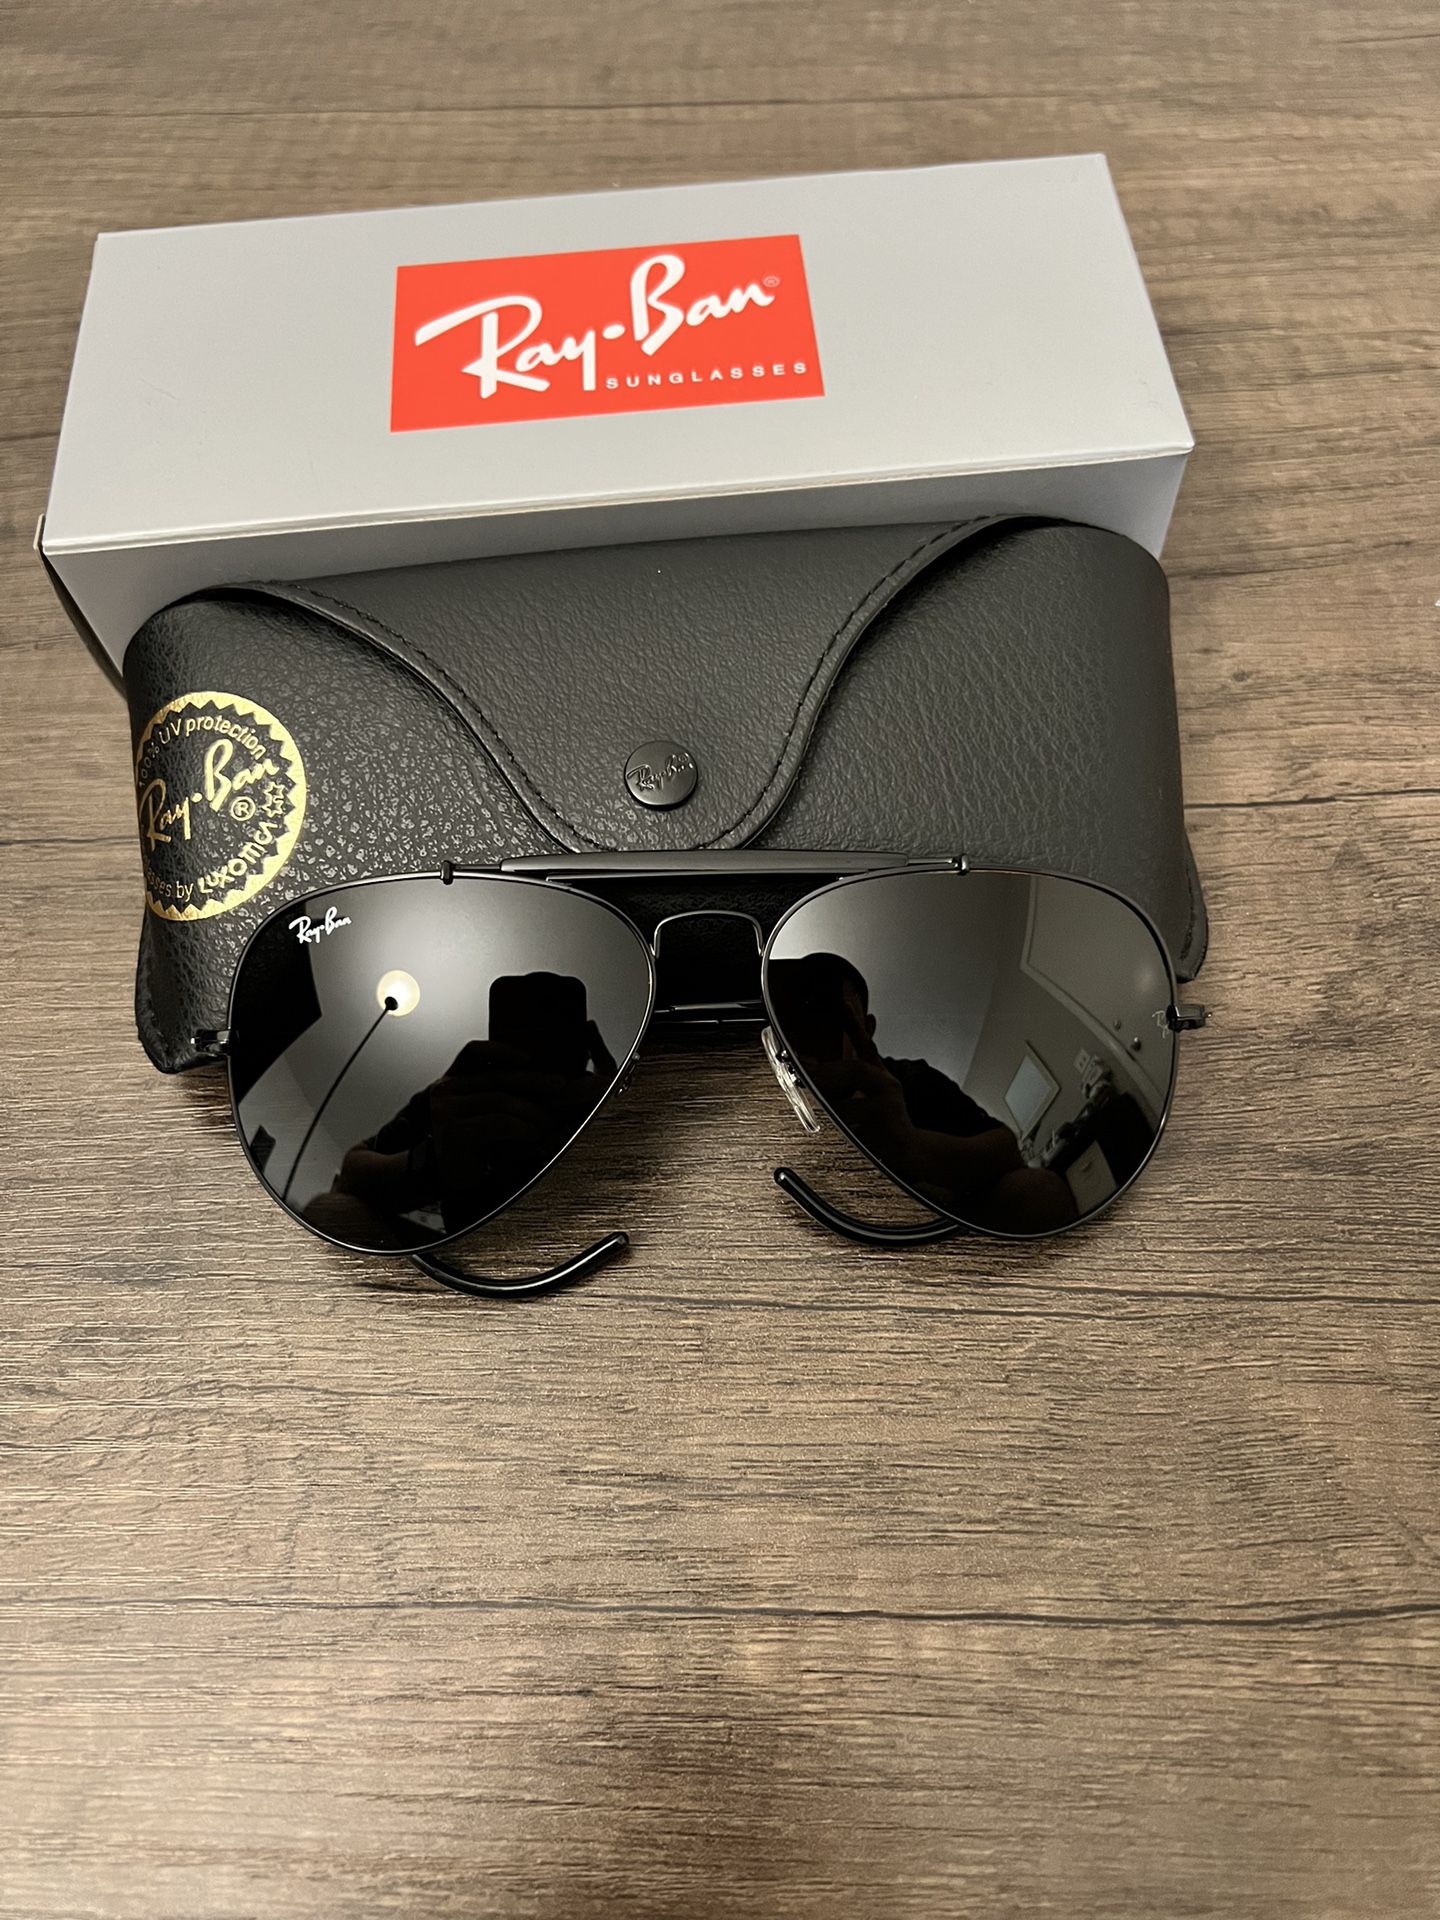 fuga martes whisky Outdoorsman Cola De Raton NEW RayBan Sunglasses with original Ray Ban  Packaging for Sale in El Monte, CA - OfferUp